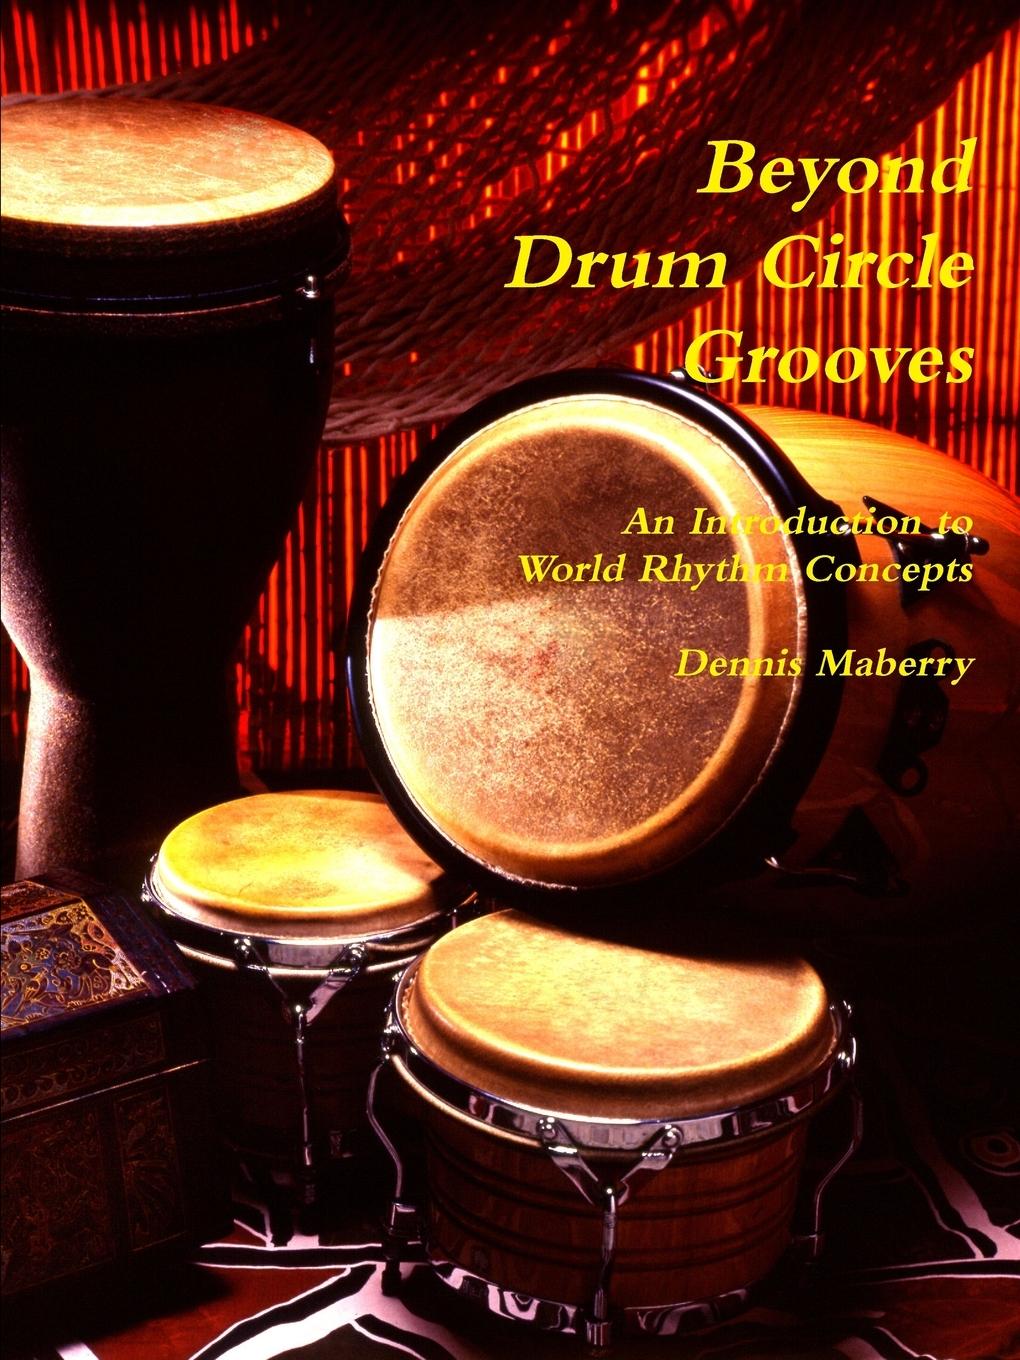 Beyond Drum Circle Grooves - Maberry, Dennis